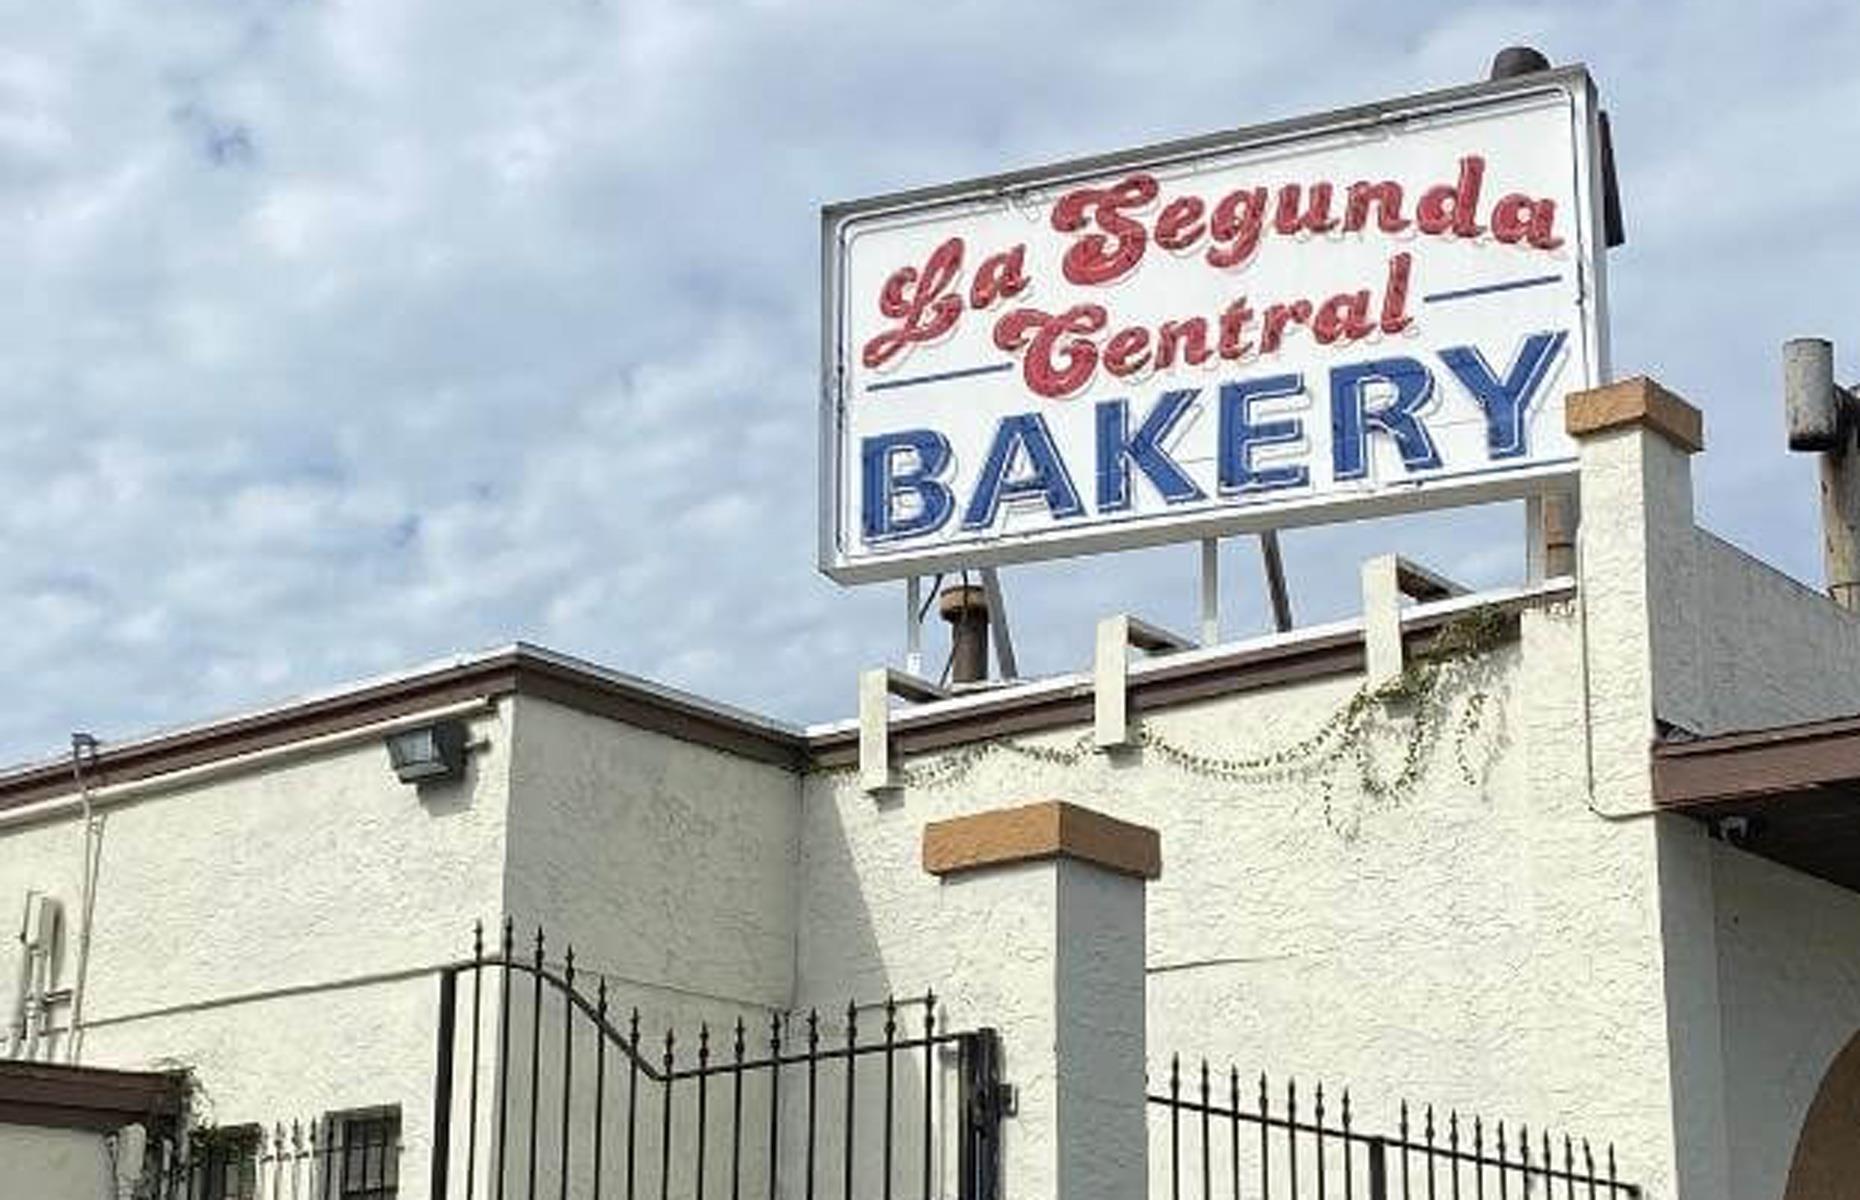 <p>One ingredient that cannot be debated in a Cuban sandwich, however, is the bread. It <em>must </em>be Cuban. <a href="https://www.lasegundabakery.com/">La Segunda Central</a> is the largest baker of Cuban bread in Tampa and delivers its signature product to stores and restaurants (including Columbia) across town. Be sure to pay this historical bakery a visit to learn how it all started with a 19th-century soldier, Juan Moré. He brought his traditional recipe to Ybor, joining a co-op of fellow bakers and cigar makers to open La Segunda.</p>  <p><strong><a href="https://www.lovefood.com/gallerylist/64340/the-mostloved-dish-in-every-state-and-where-to-eat-it">Now discover the most-loved dish in every US state – and where to eat it</a></strong></p>  <p><span><strong>Liked this? Click on the Follow button above for more great stories from loveFOOD</strong></span></p>